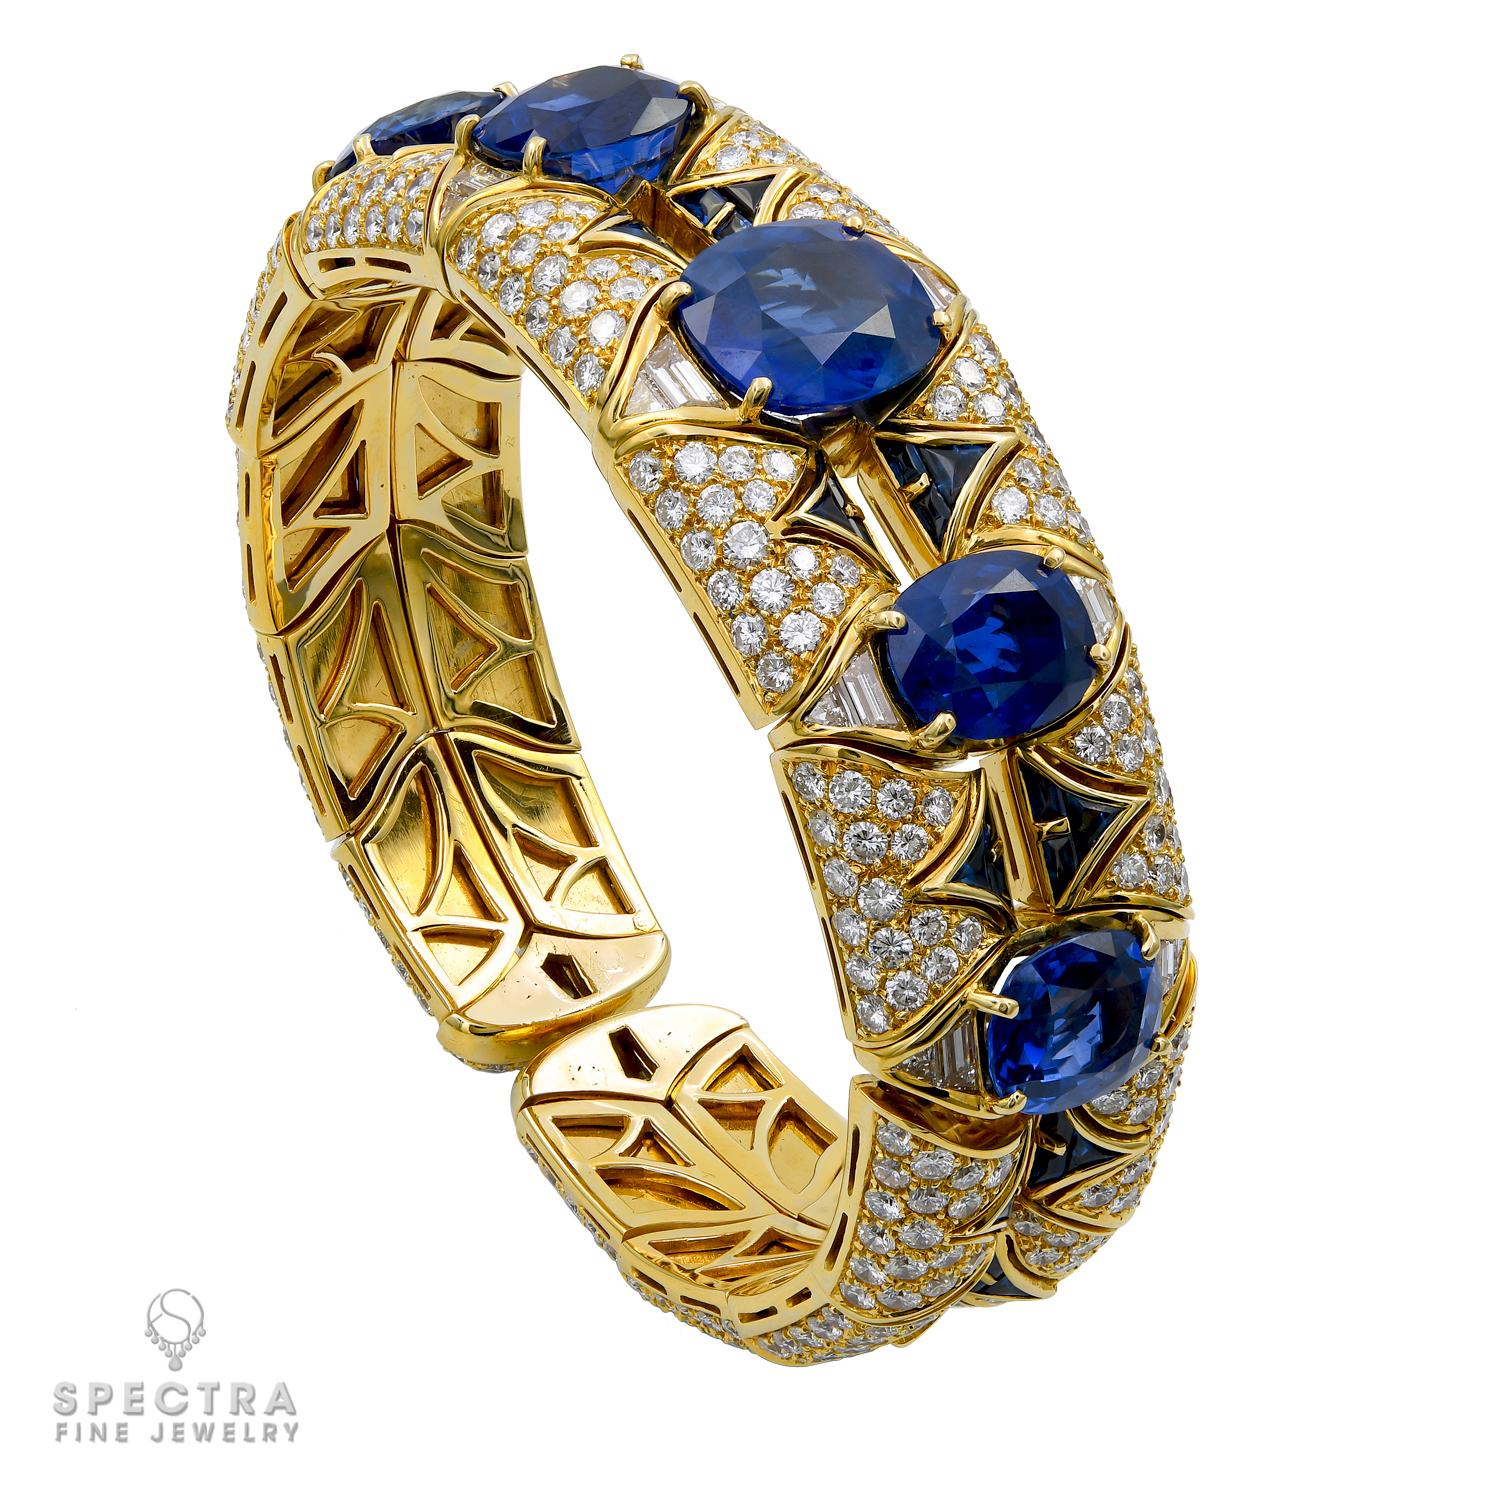 Founded in 1884 in Rome, Bulgari is known for signature sunny shades of yellow gold and vibrantly colored gemstones composed in curvaceous patterns. The muse of this Italian fine jewelry Maison has long been Italian femininity itself, which is